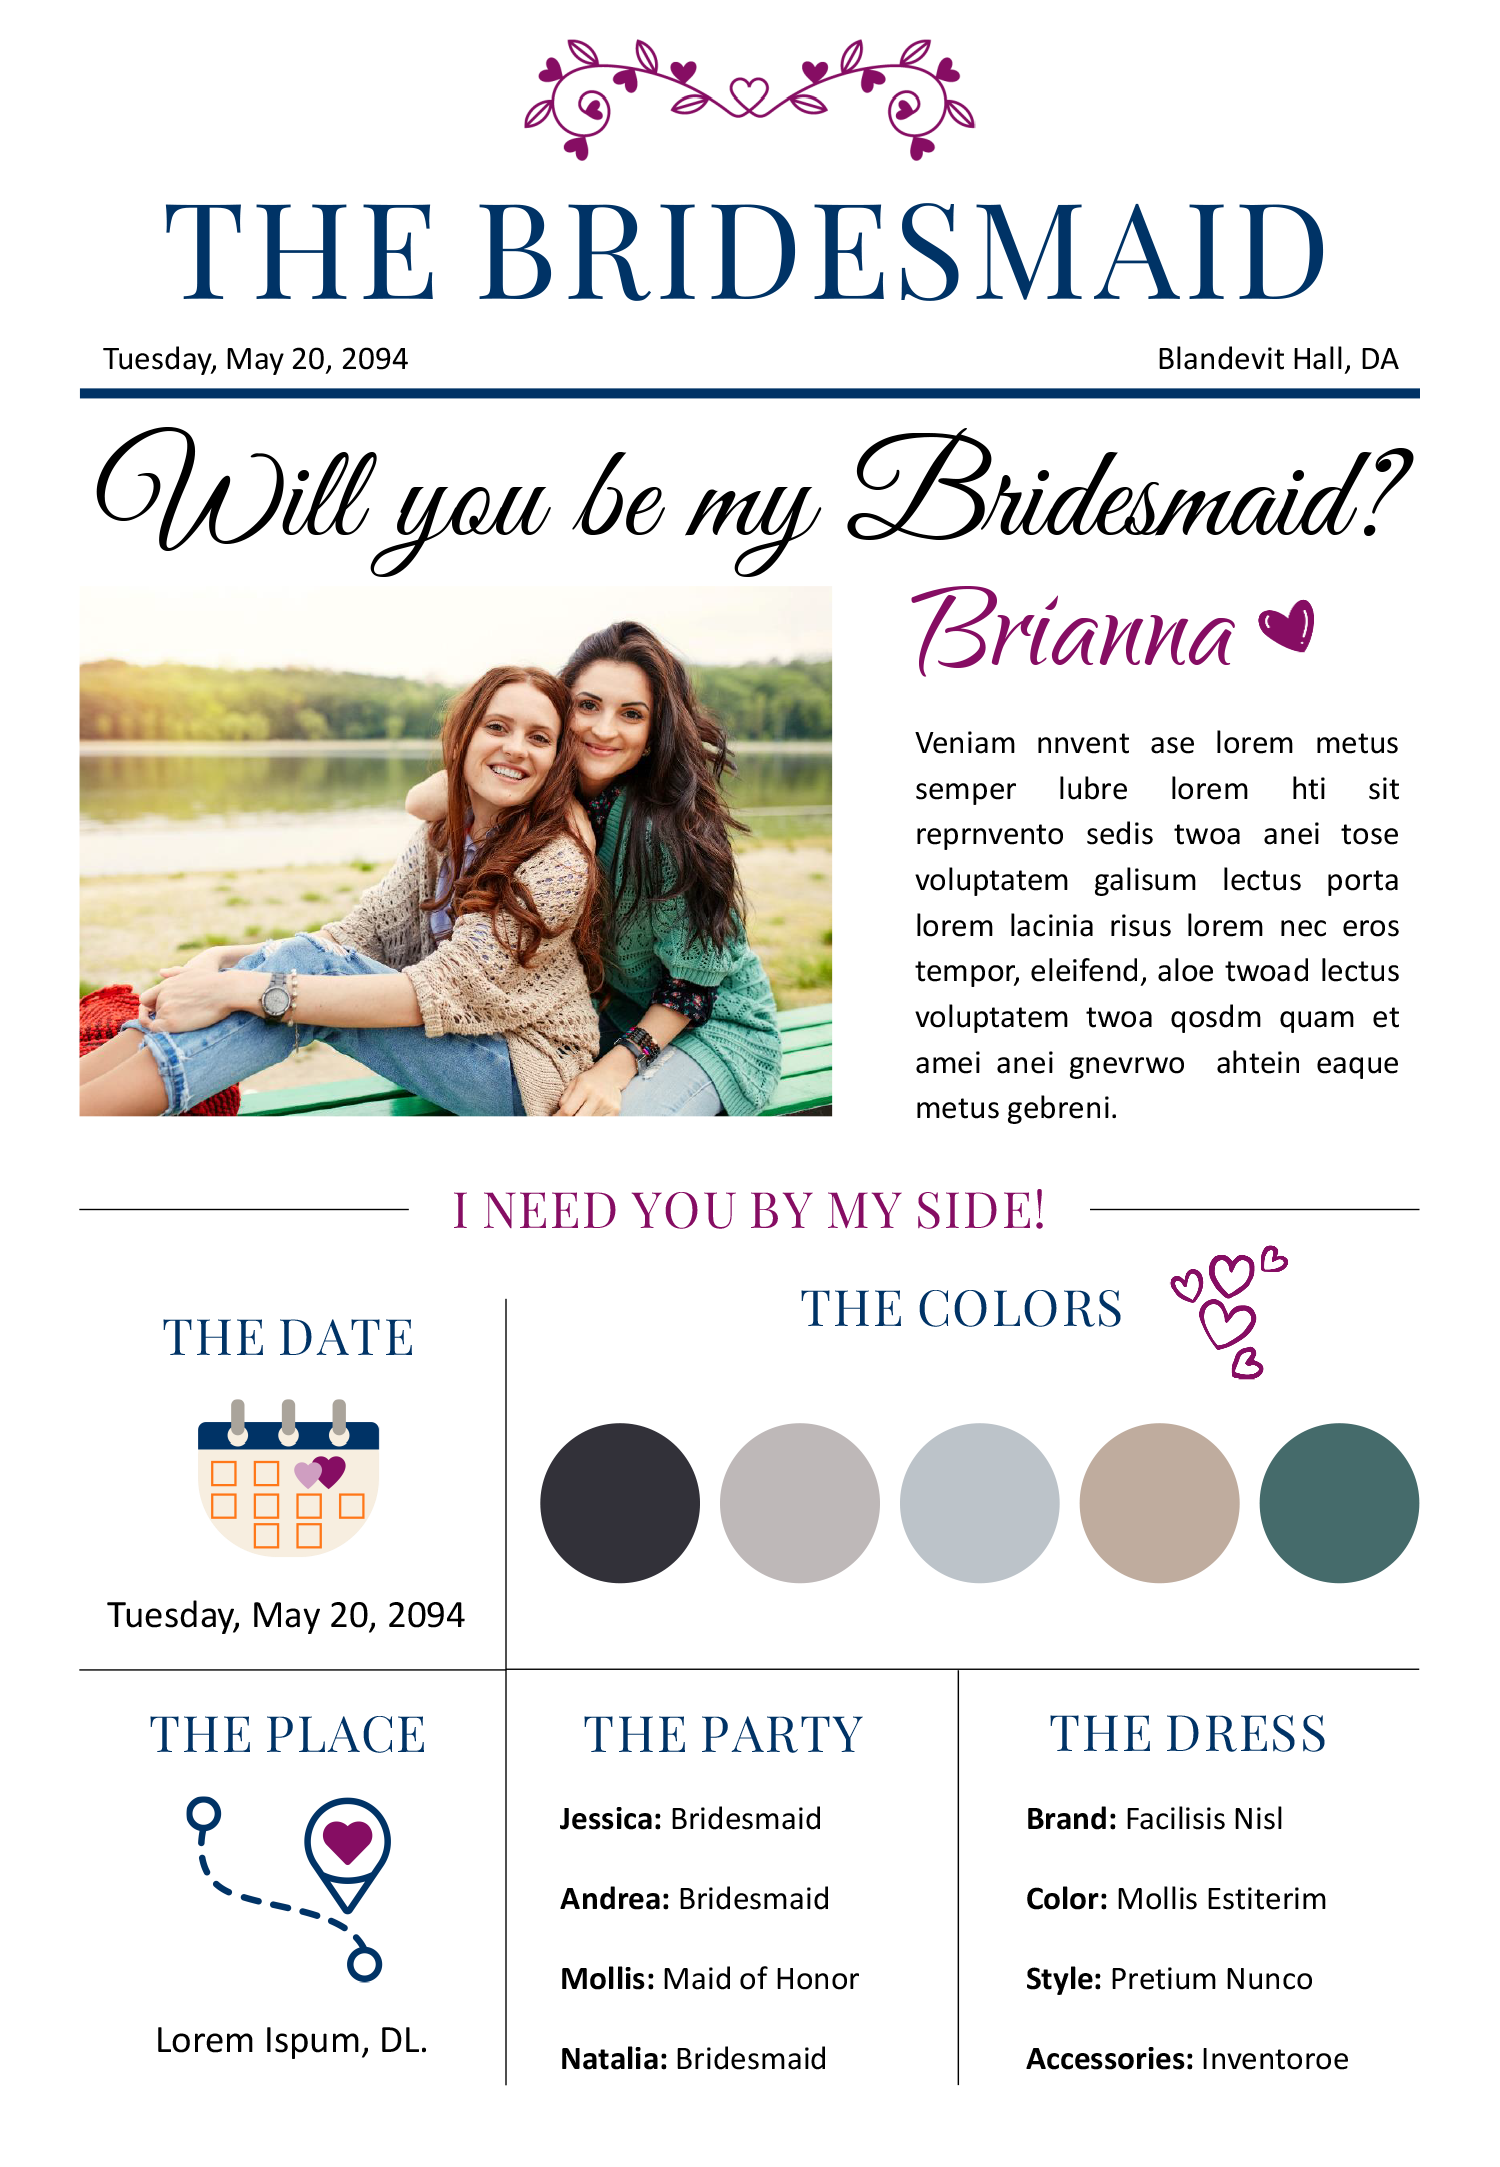 Bridesmaid Proposal Newspaper Template - Front Page